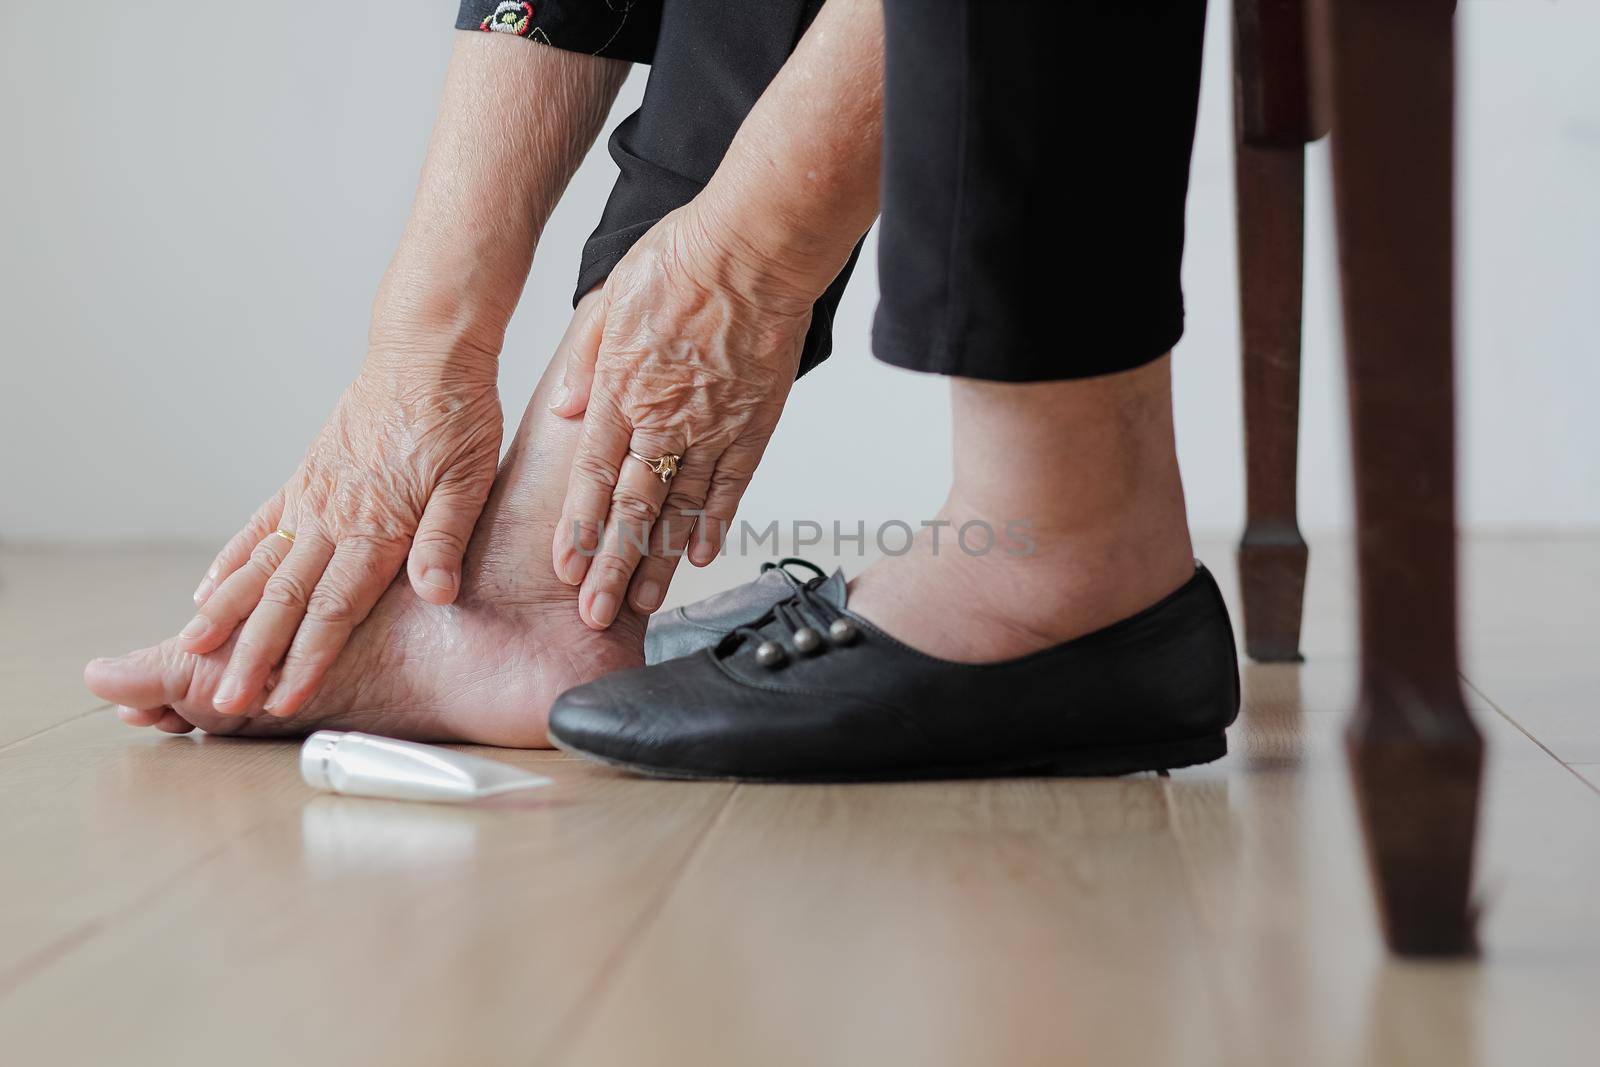 Elderly woman putting cream on swollen feet before put on shoes by toa55